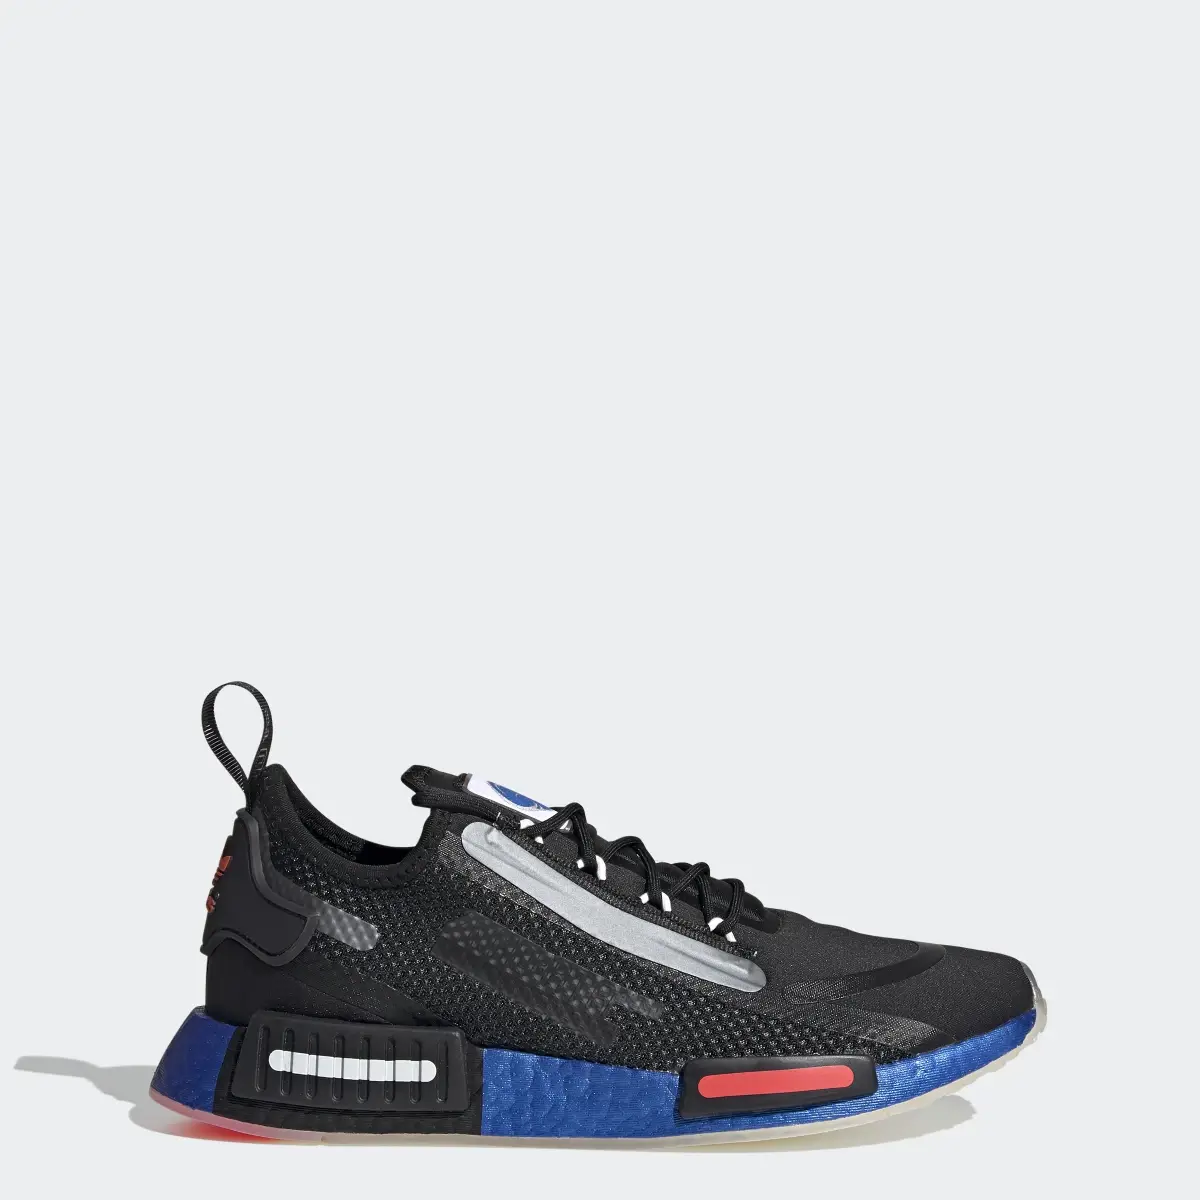 Adidas NMD_R1 SPECTOO SHOES. 1